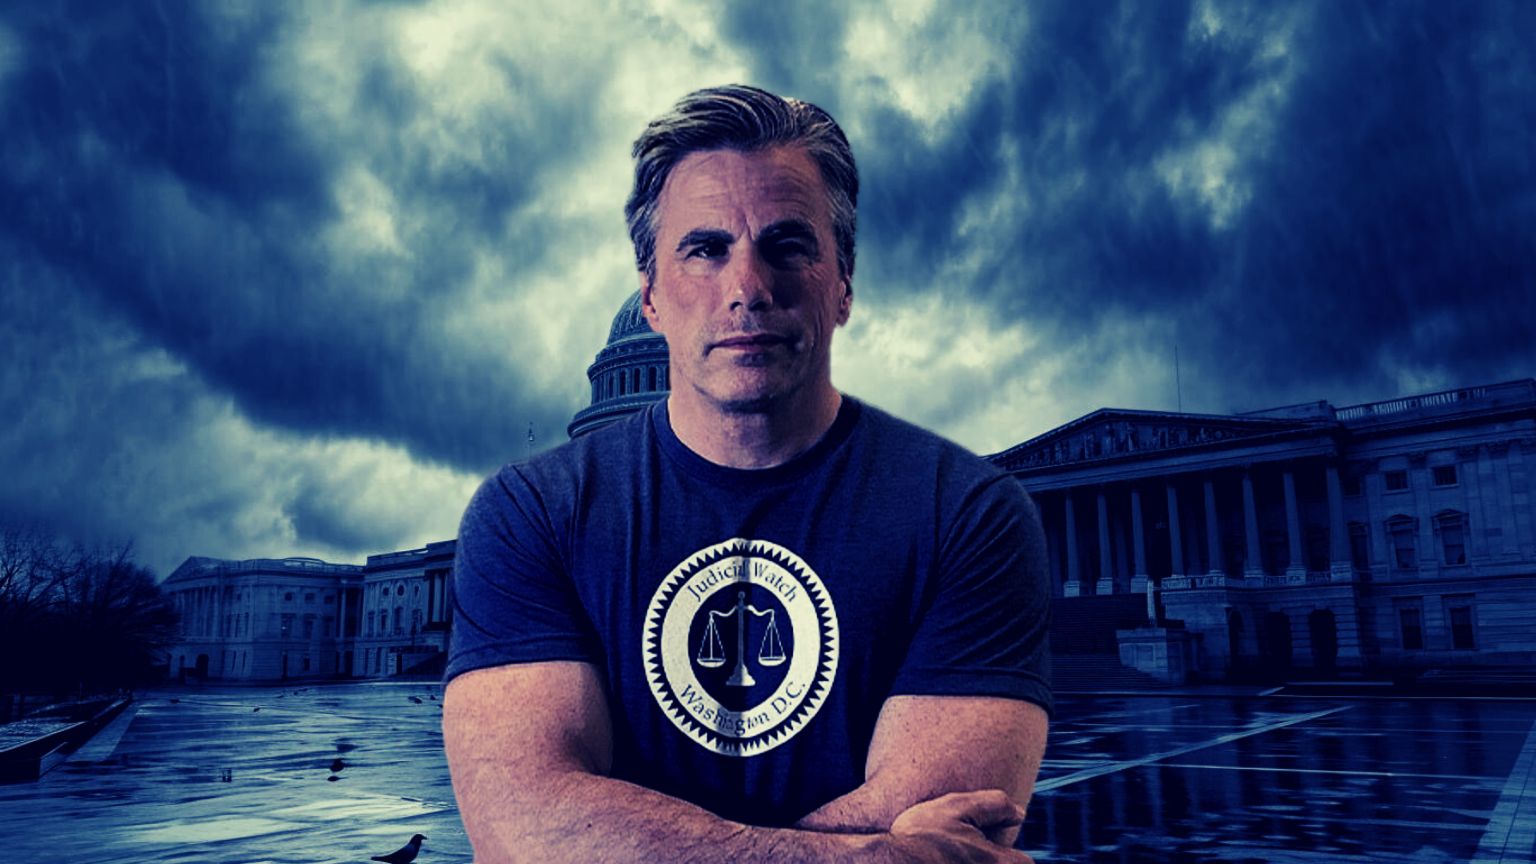 Judicial Watch Sues Biden DHS for Records Targeting Judicial Watch and Its President Tom Fitton